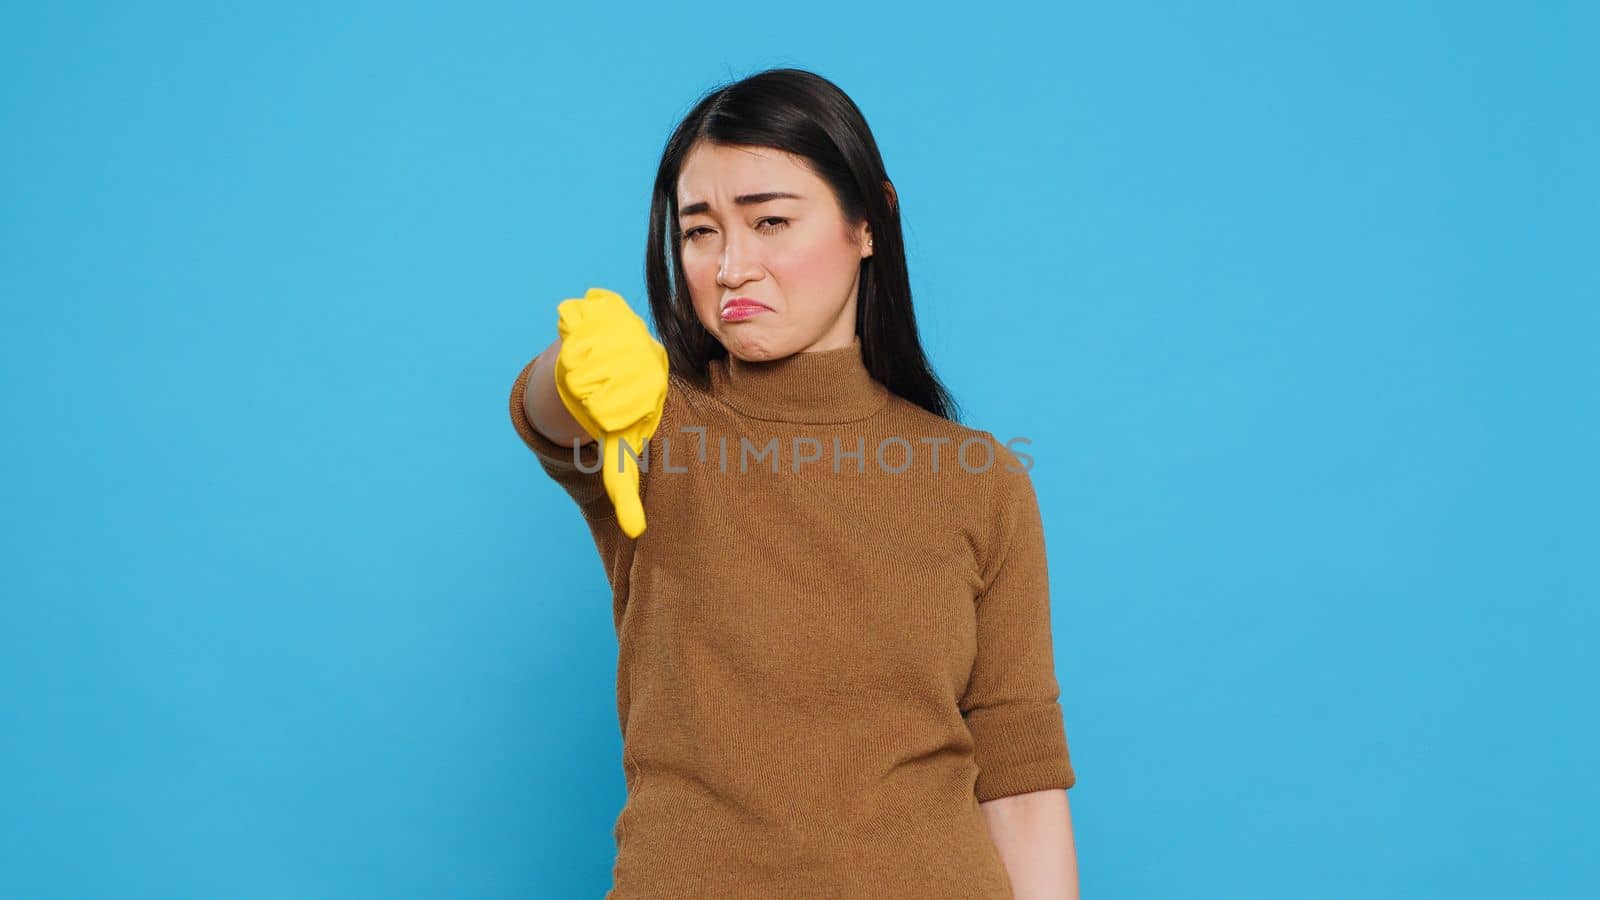 Upset asian maid doing thumbs down gesture while cleaning client house using houseclean detergent, posing in studio. Housekeeper is also knowledgeable about proper hygiene and cleanliness practices